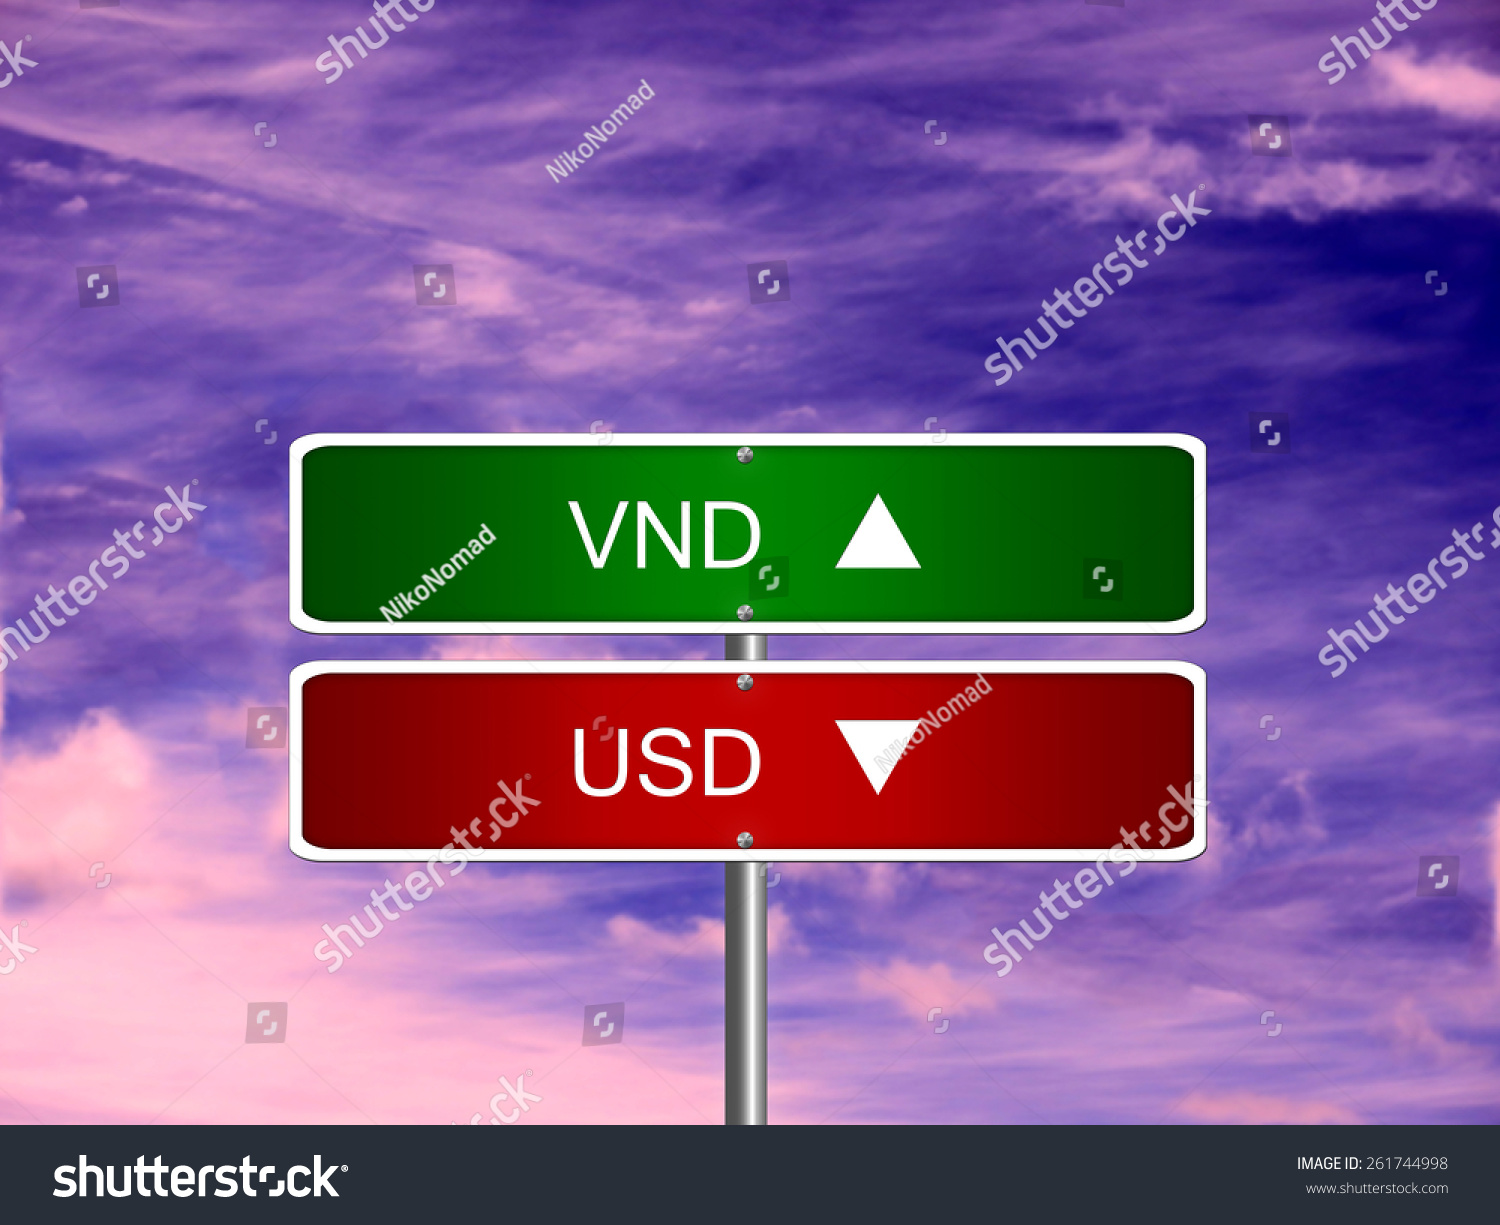 Usd vnd forex